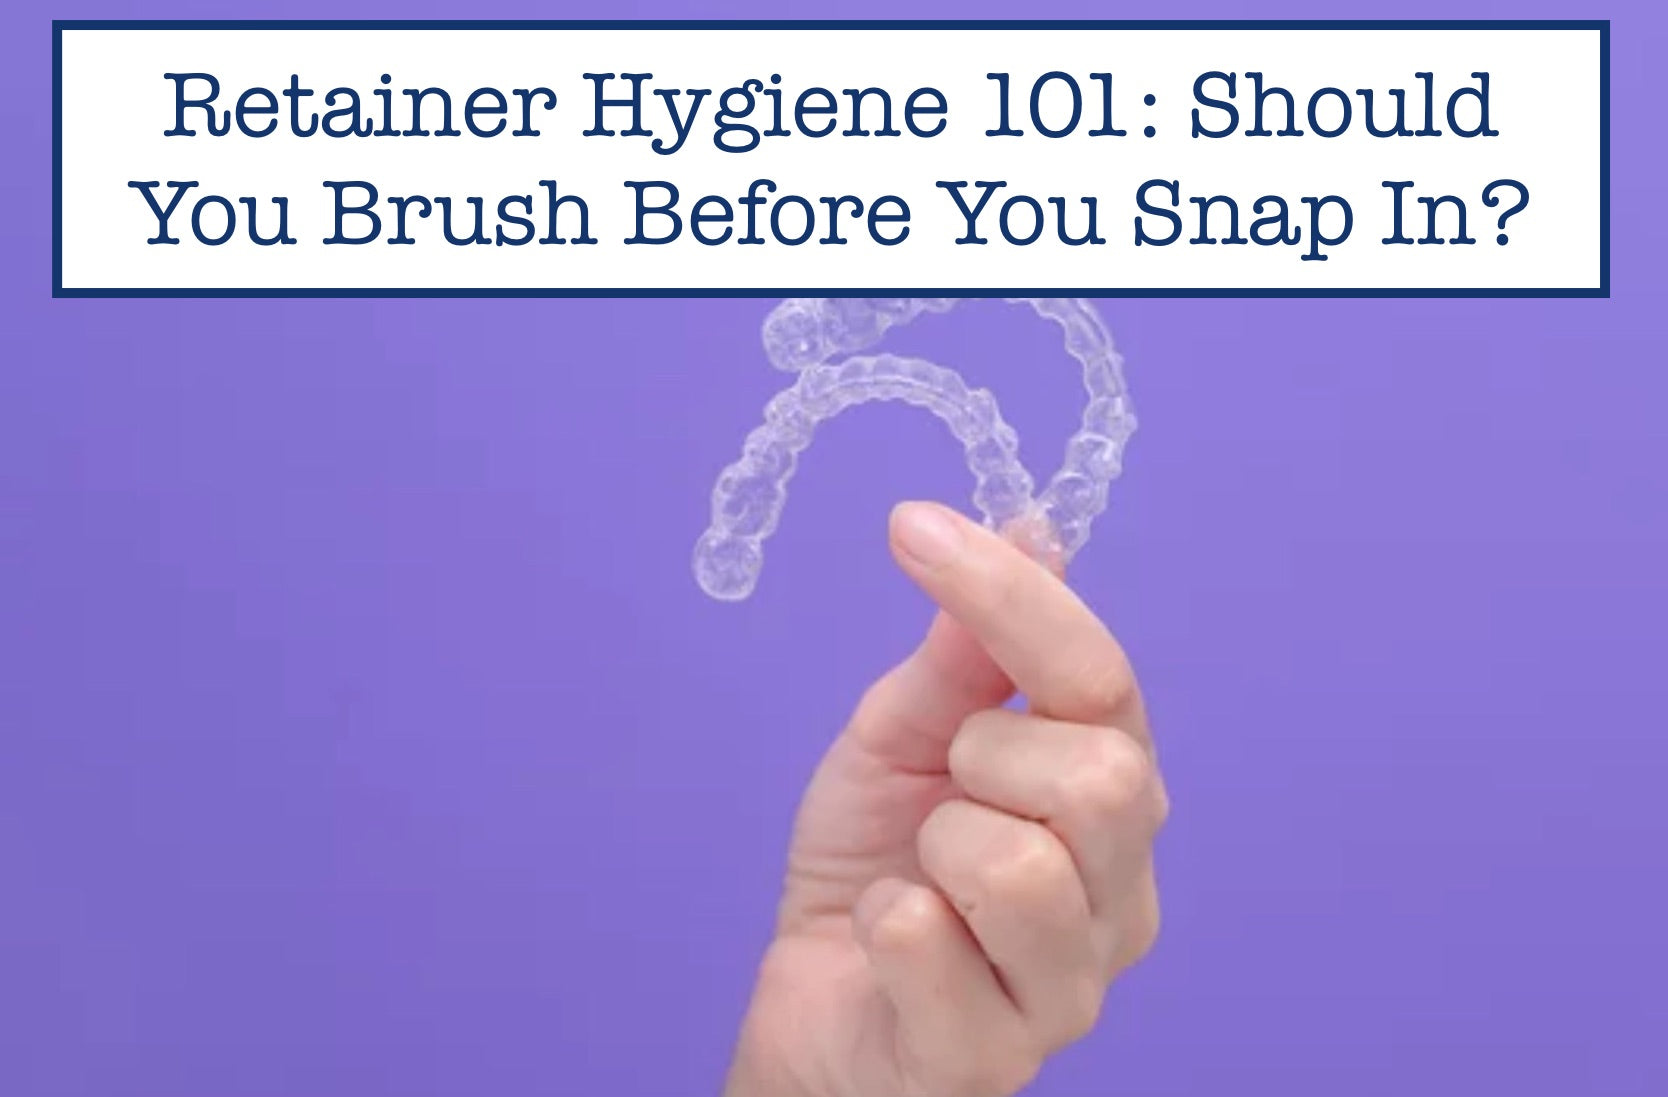 Retainer Hygiene 101: Should You Brush Before You Snap In?